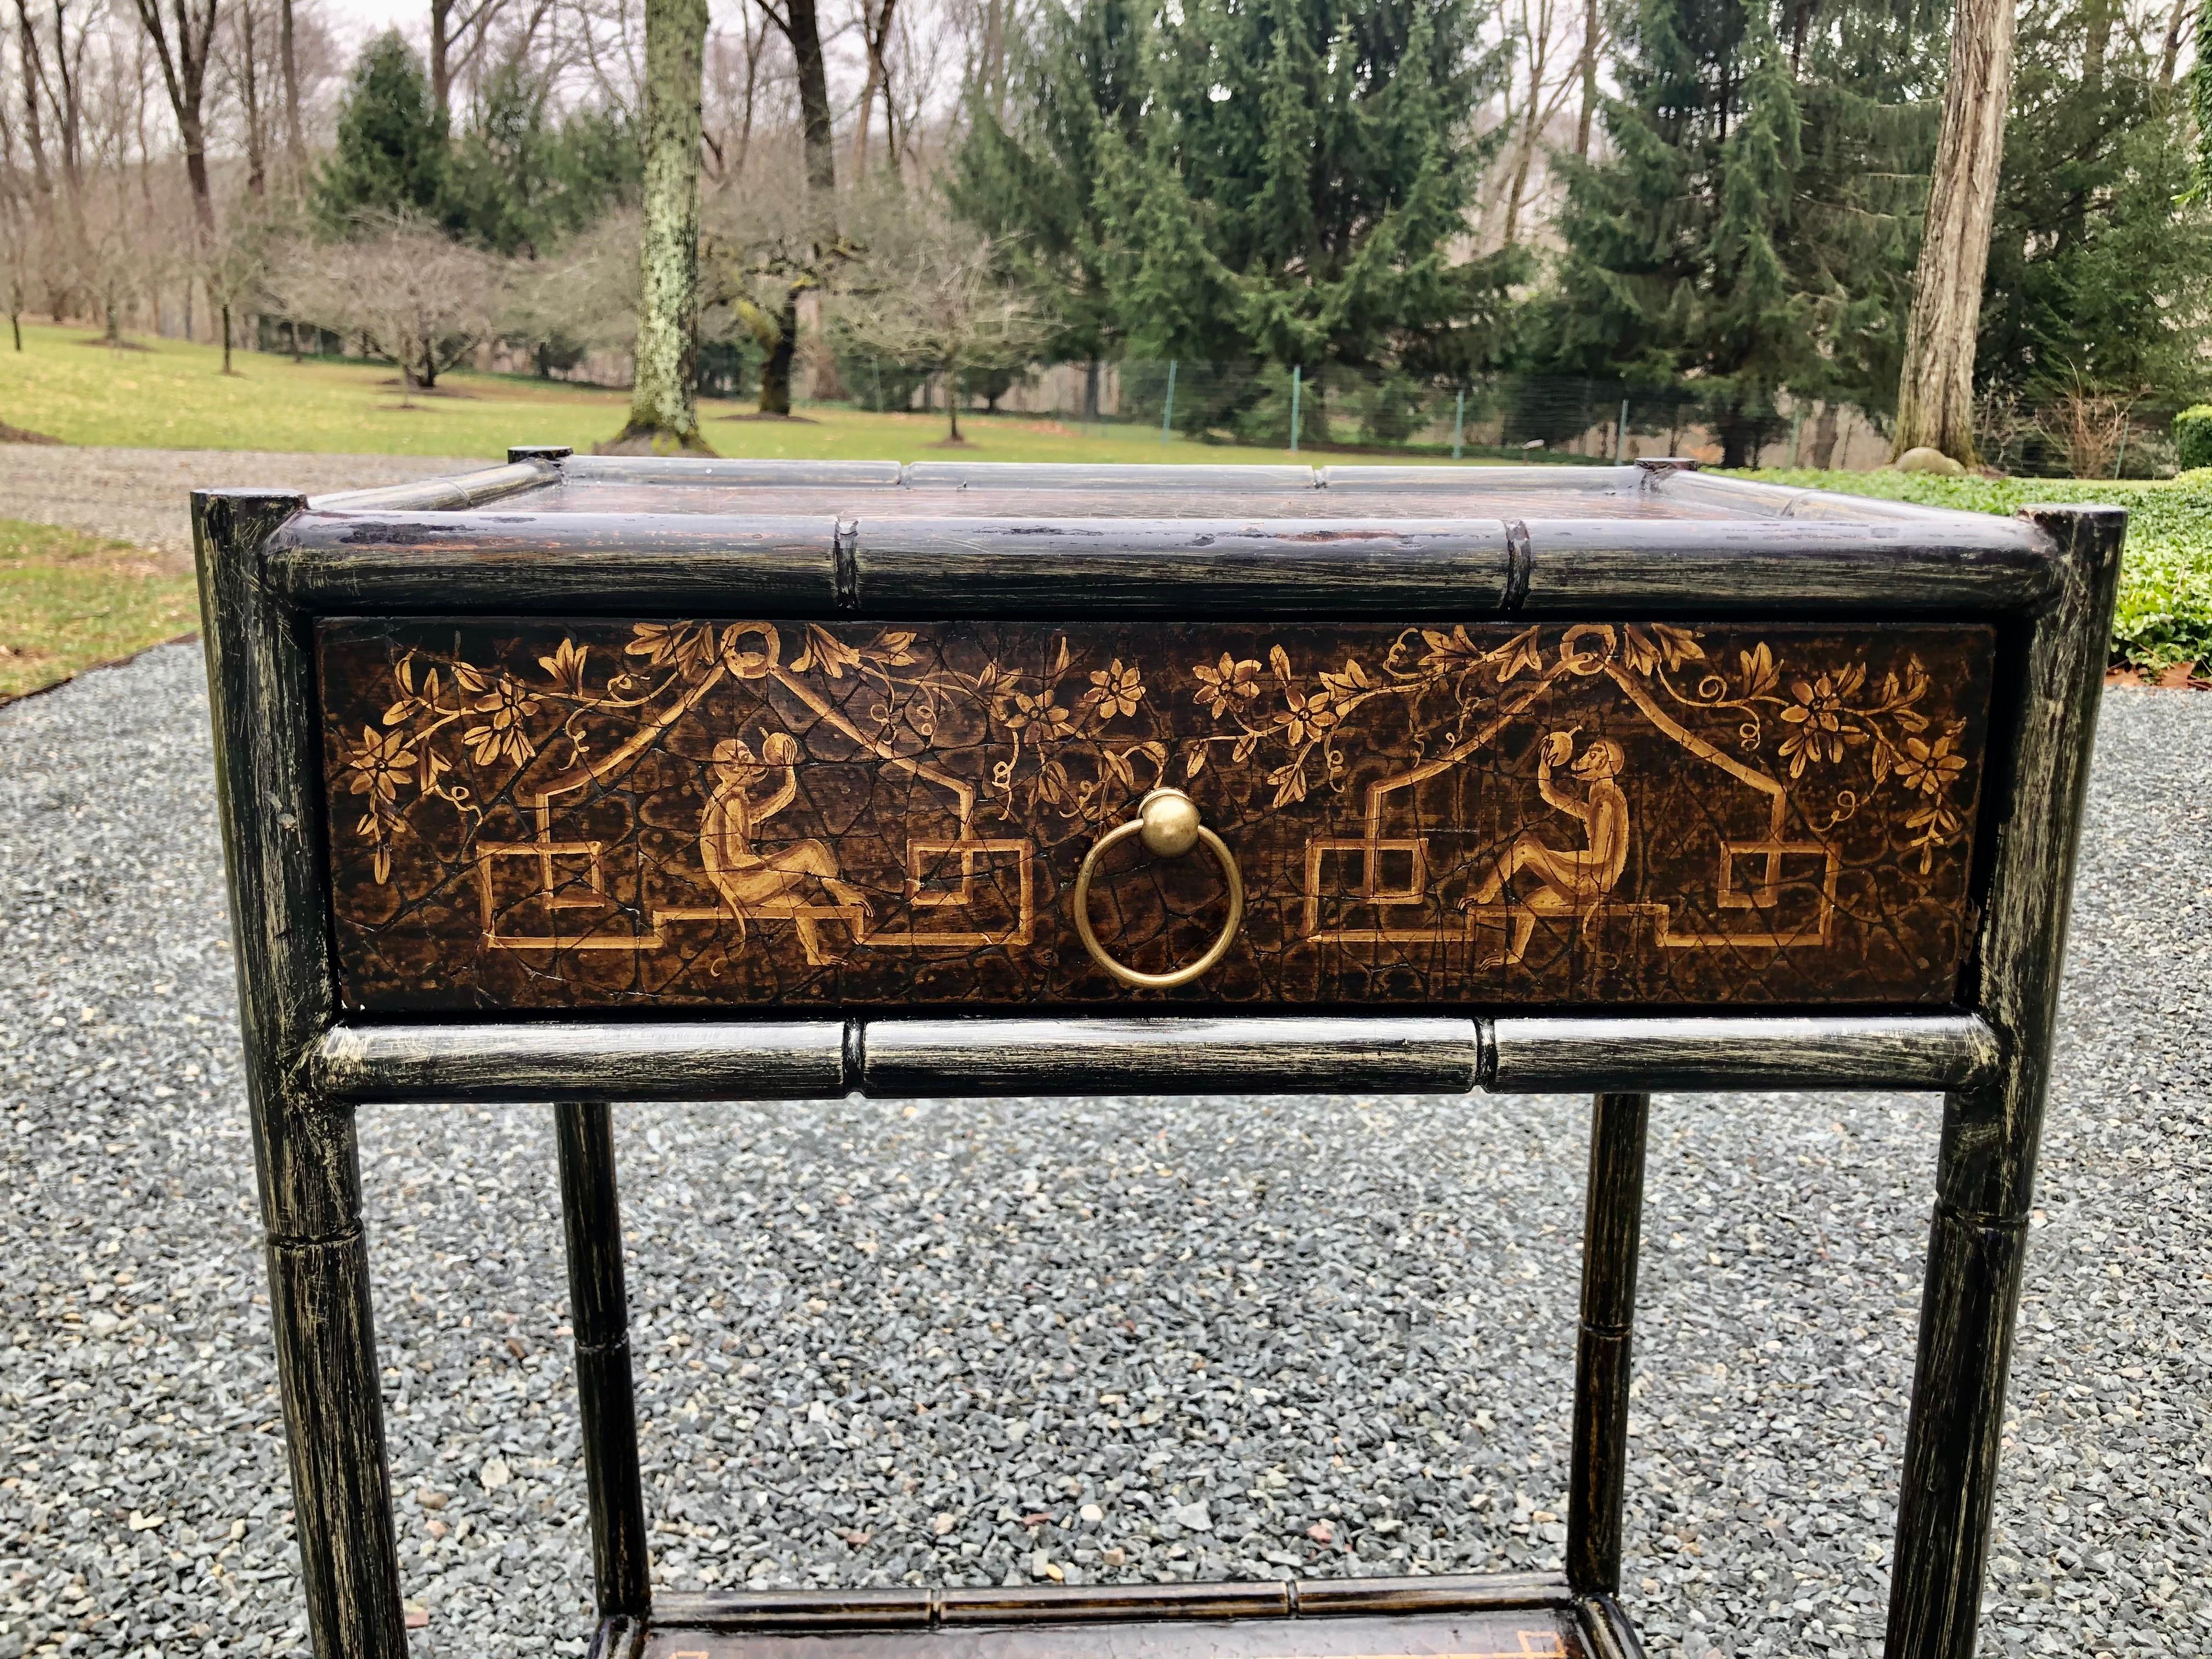 Hand painted and leather end table or night stand having distressed black background and marvelous paintings of a monkey holding a piece of fruit on the single drawer, and lovely trellis design on sides and back. The leather is embossed in an